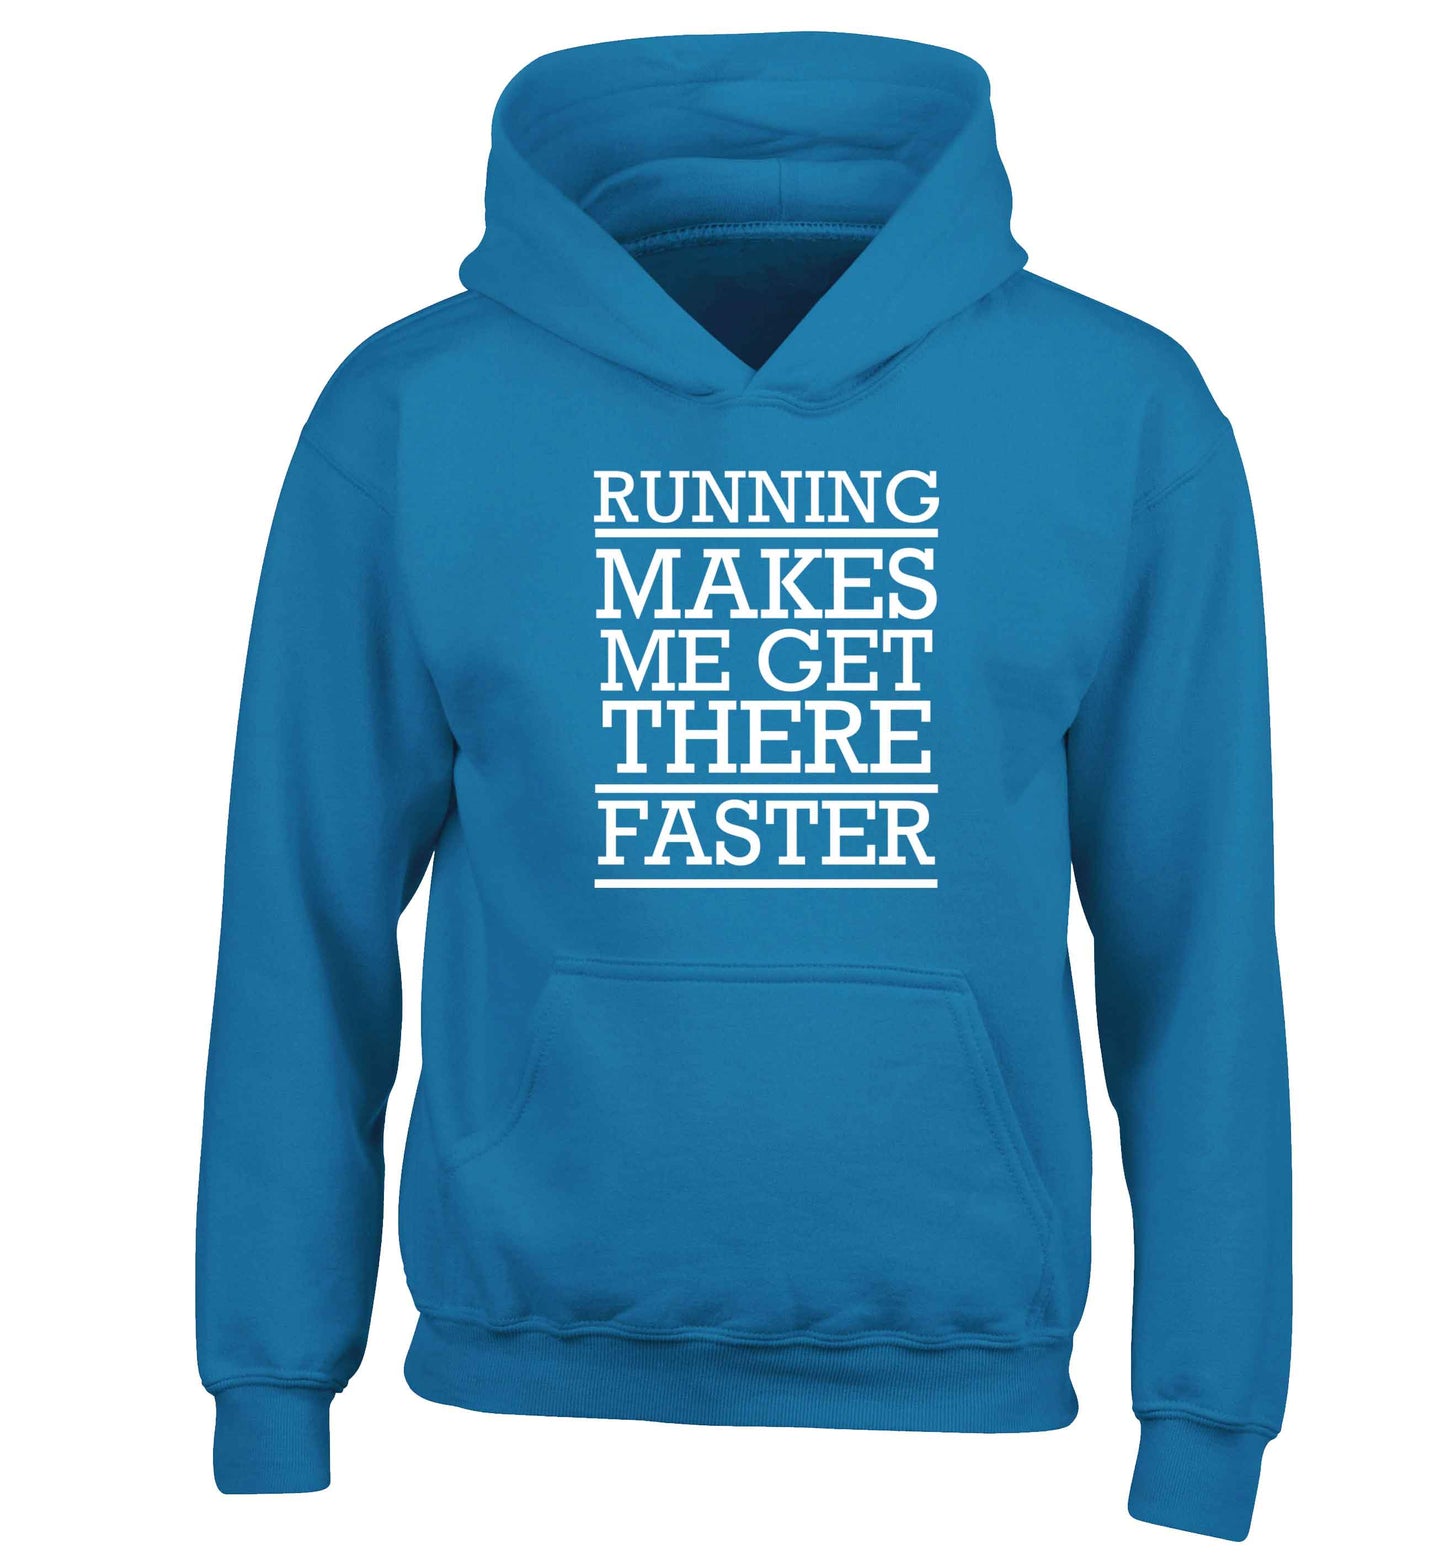 Running makes me get there faster children's blue hoodie 12-13 Years